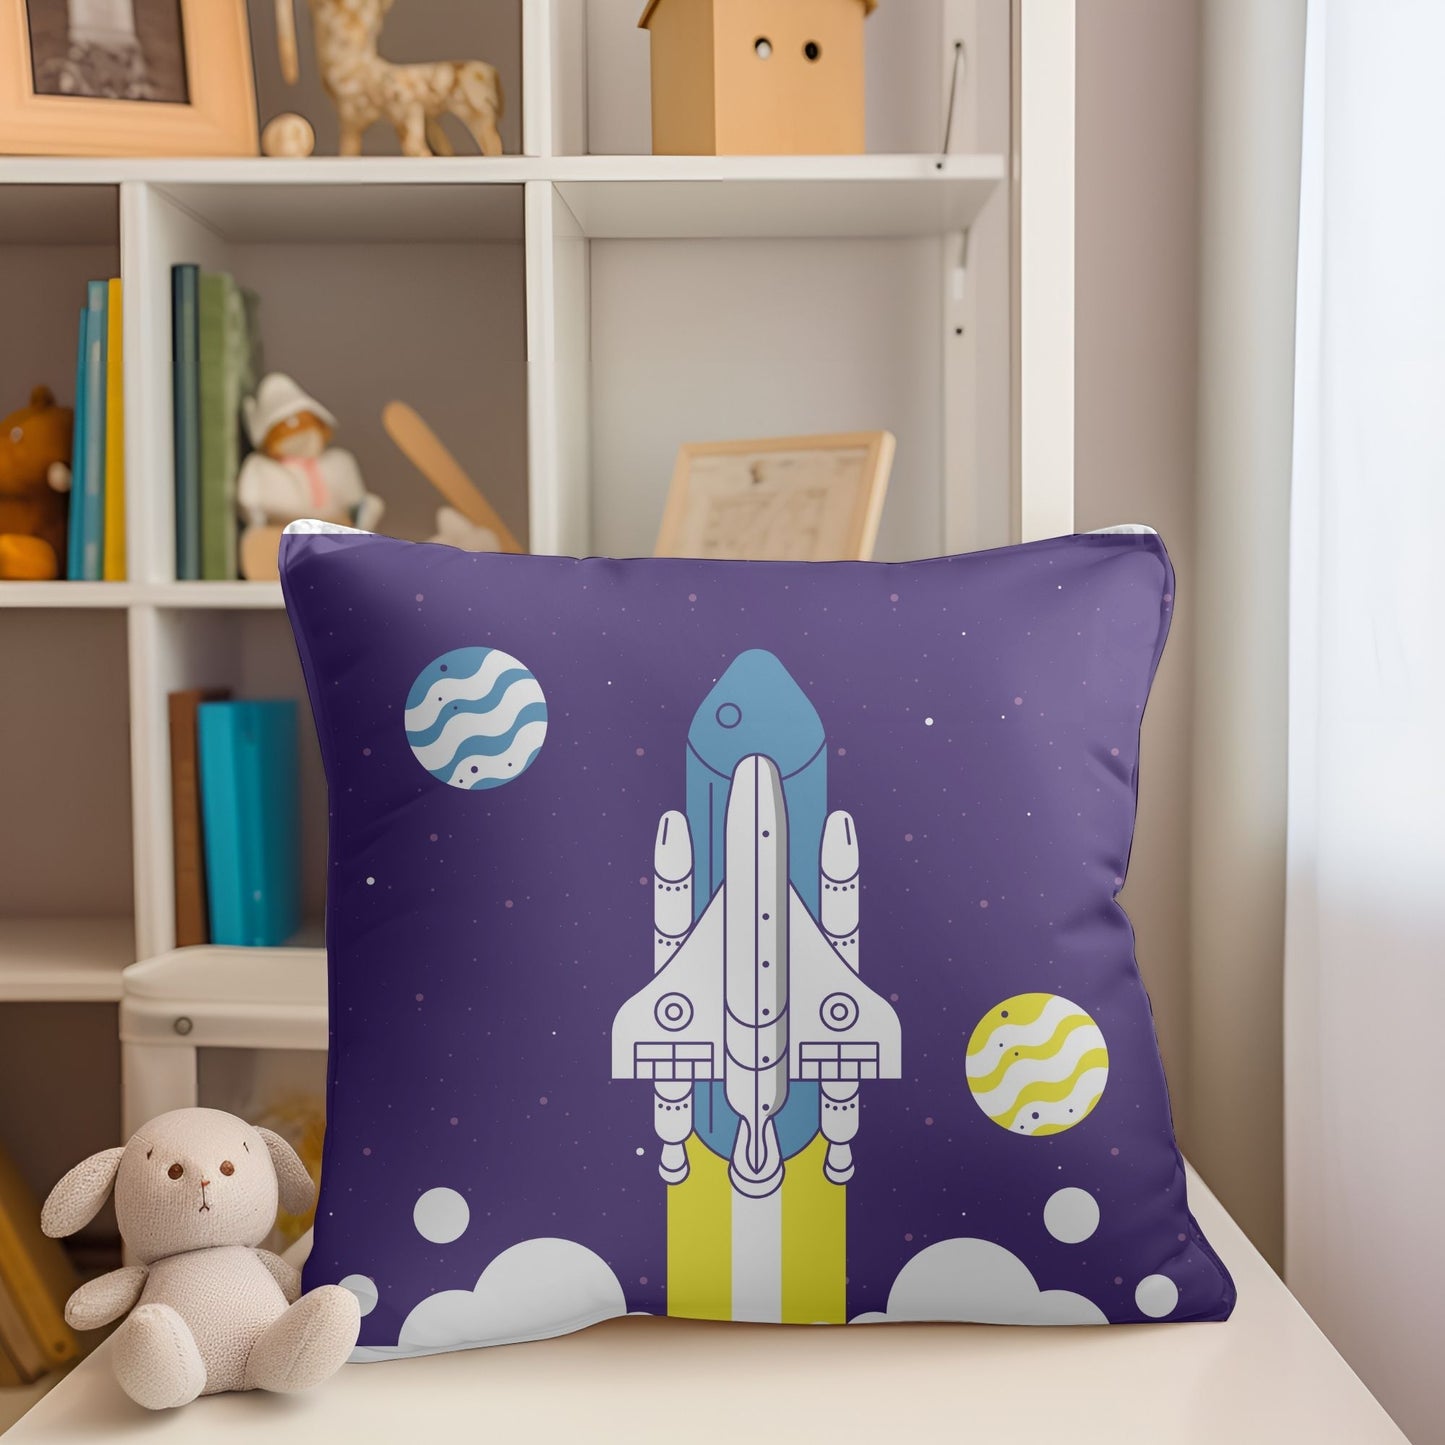 Charming kids pillow adorned with a space rocket in flight for adventurous dreams.